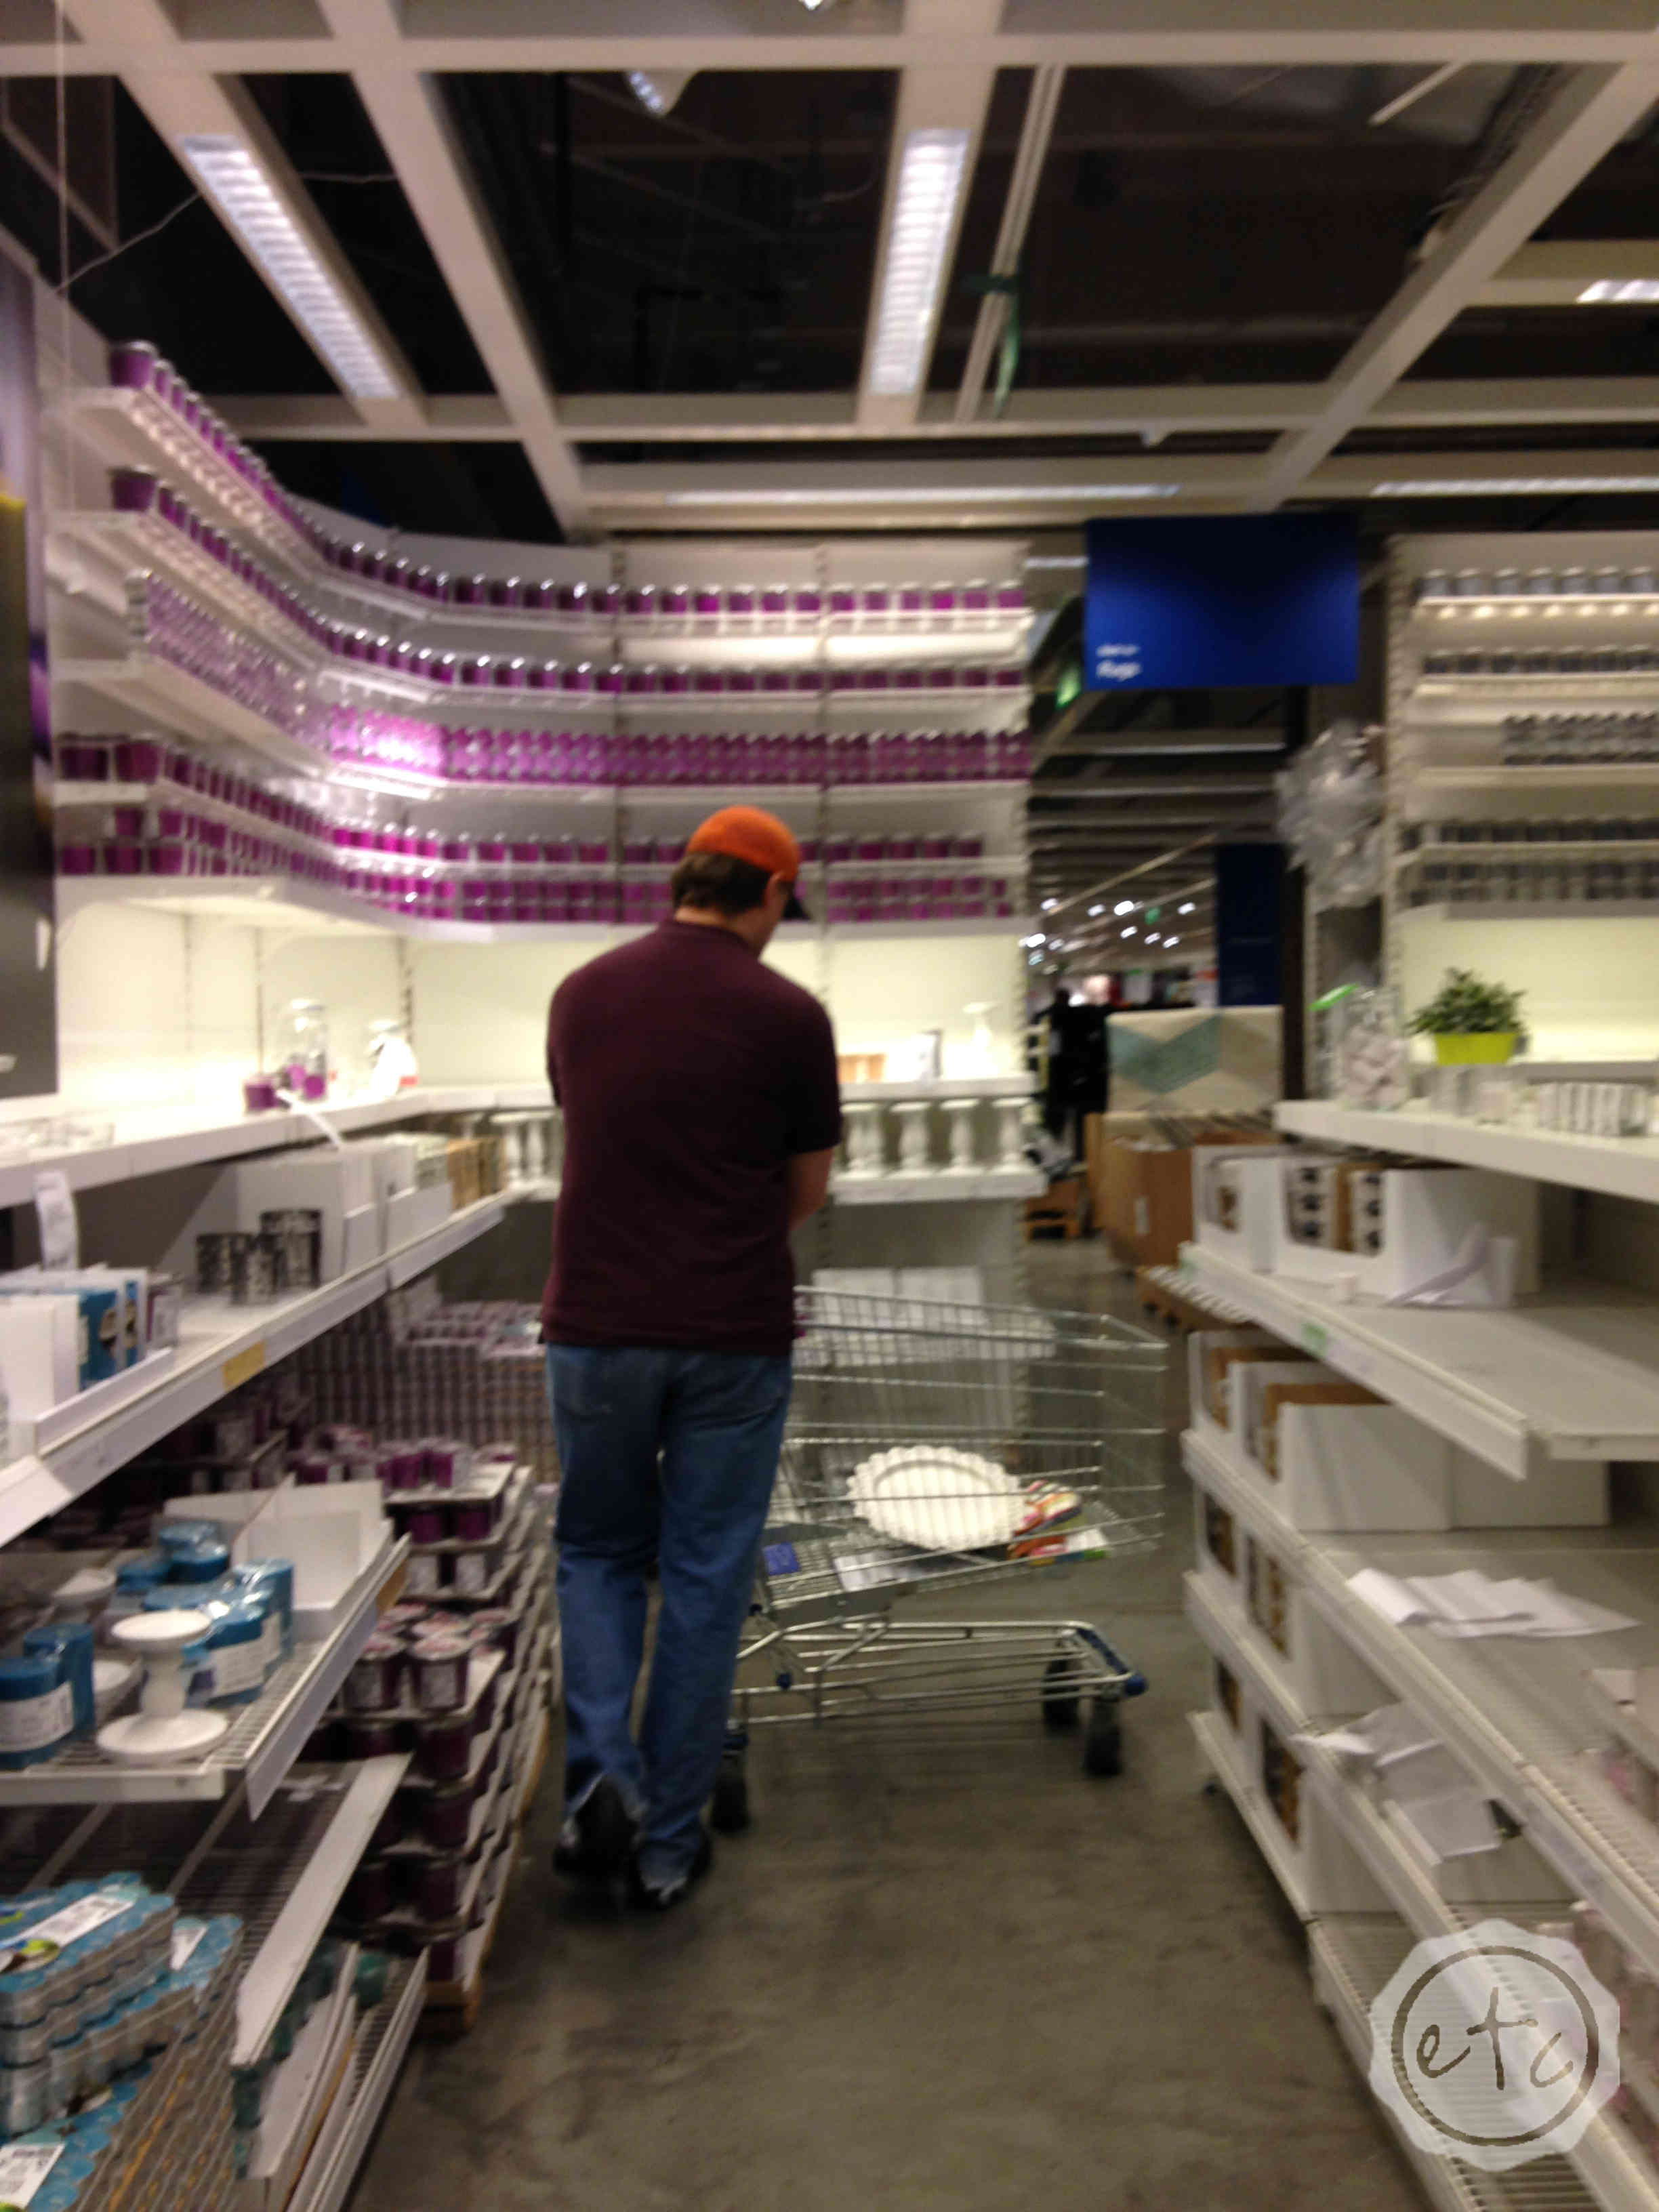 Found It! Shopping at IKEA! | Happily Ever After, Etc.